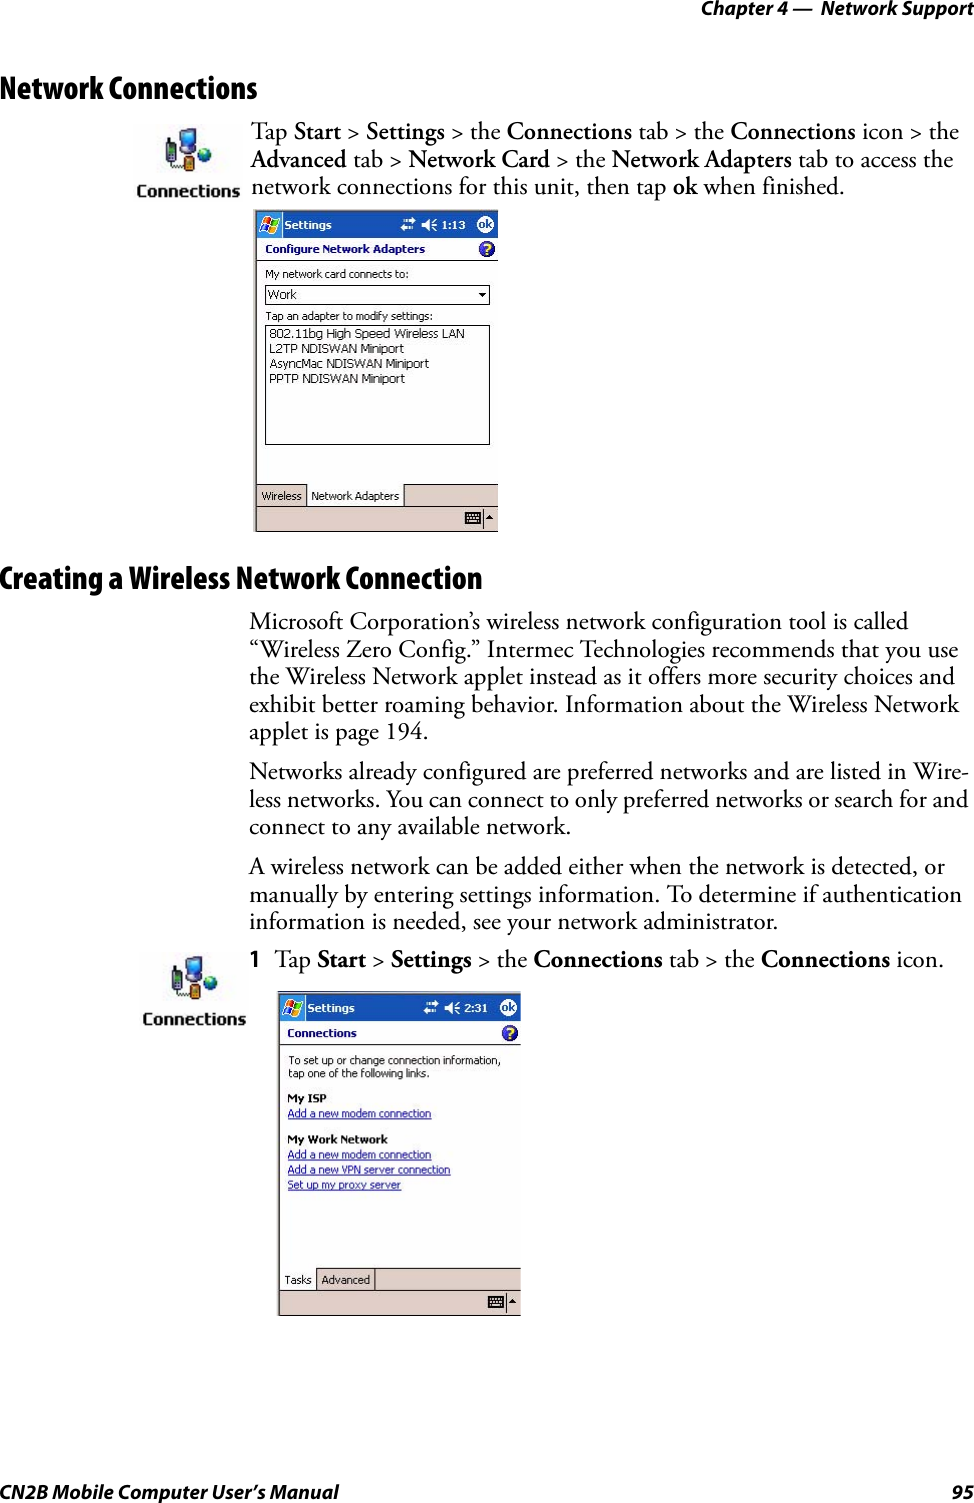 Chapter 4 —  Network SupportCN2B Mobile Computer User’s Manual 95Network ConnectionsCreating a Wireless Network ConnectionMicrosoft Corporation’s wireless network configuration tool is called “Wireless Zero Config.” Intermec Technologies recommends that you use the Wireless Network applet instead as it offers more security choices and exhibit better roaming behavior. Information about the Wireless Network applet is page 194.Networks already configured are preferred networks and are listed in Wire-less networks. You can connect to only preferred networks or search for and connect to any available network.A wireless network can be added either when the network is detected, or manually by entering settings information. To determine if authentication information is needed, see your network administrator.Tap  Start &gt; Settings &gt; the Connections tab &gt; the Connections icon &gt; the Advanced tab &gt; Network Card &gt; the Network Adapters tab to access the network connections for this unit, then tap ok when finished.1Tap  Start &gt; Settings &gt; the Connections tab &gt; the Connections icon.